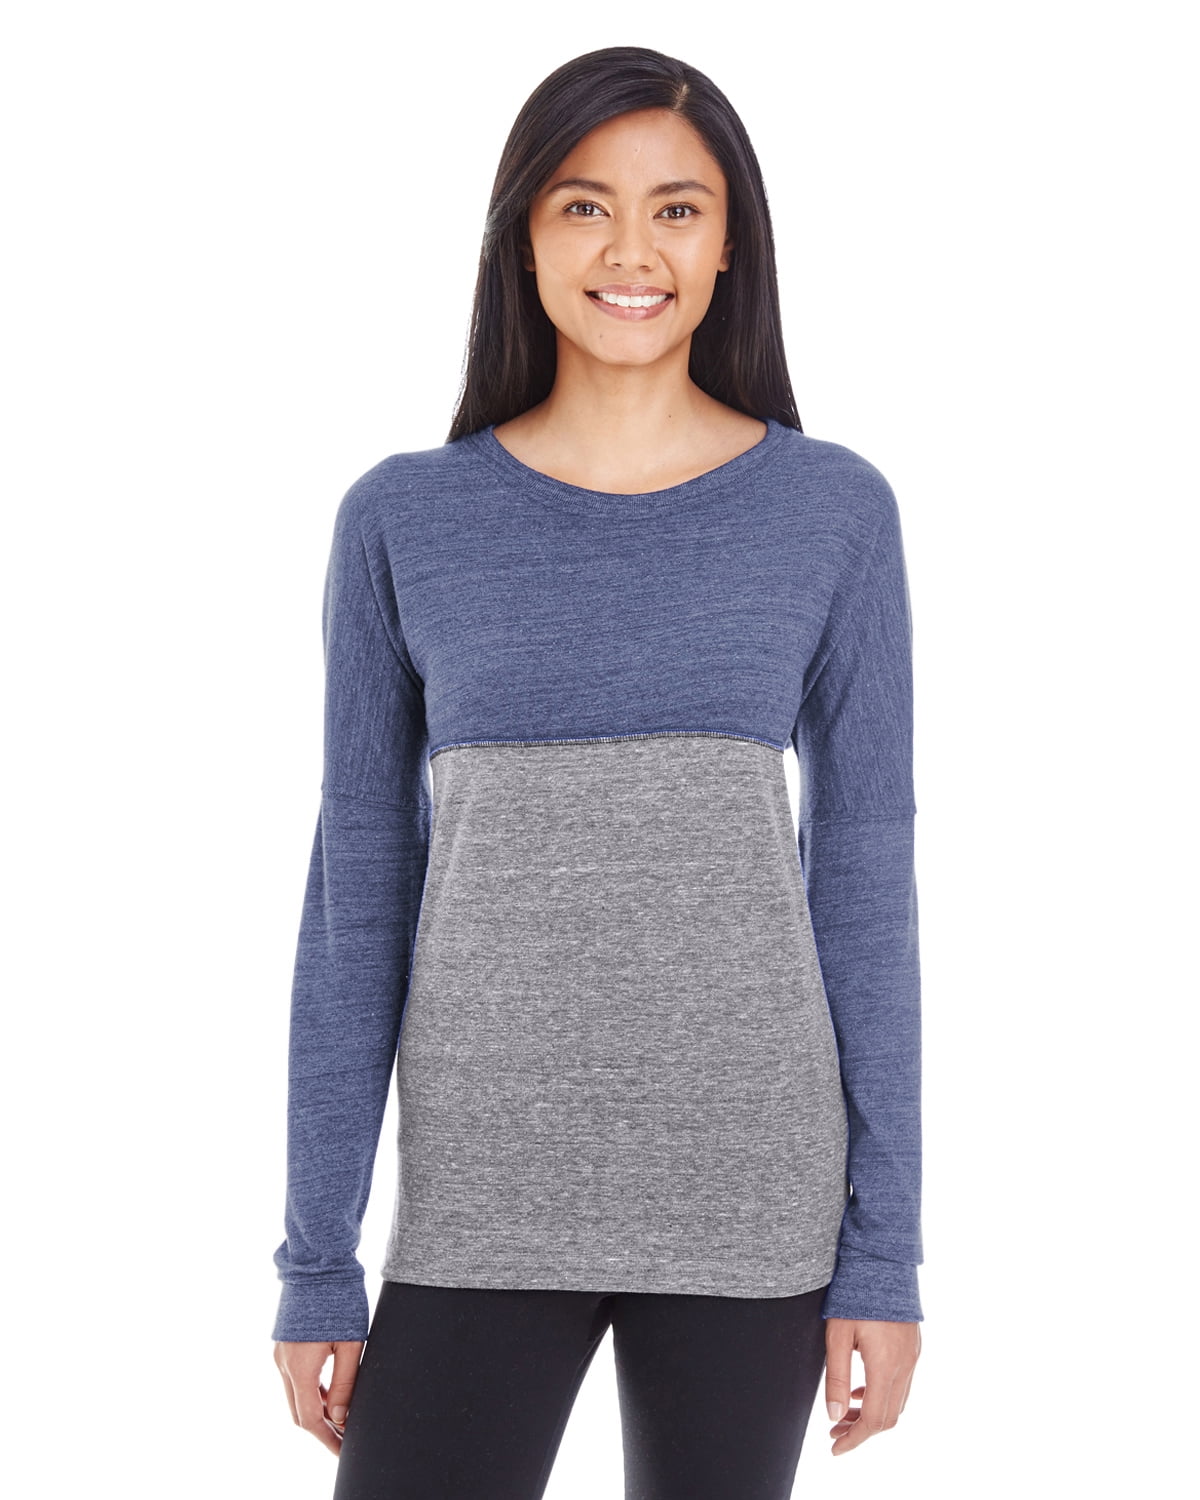 Holloway - A Product of Holloway Ladies' Low Key Pullover - VN NAVY/ VN ...